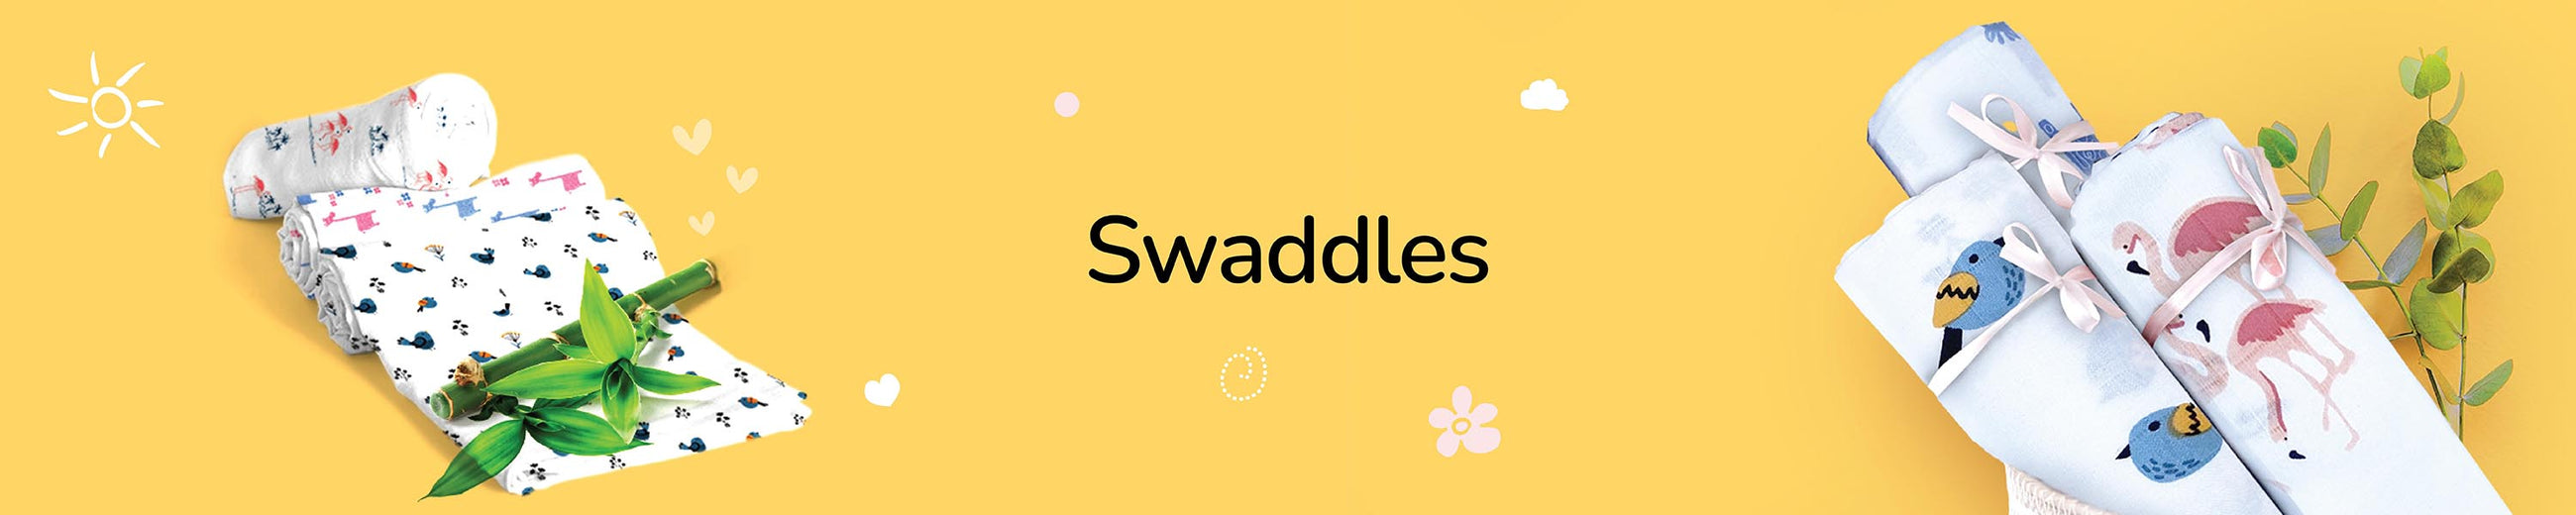 Pack of 2 Swaddles